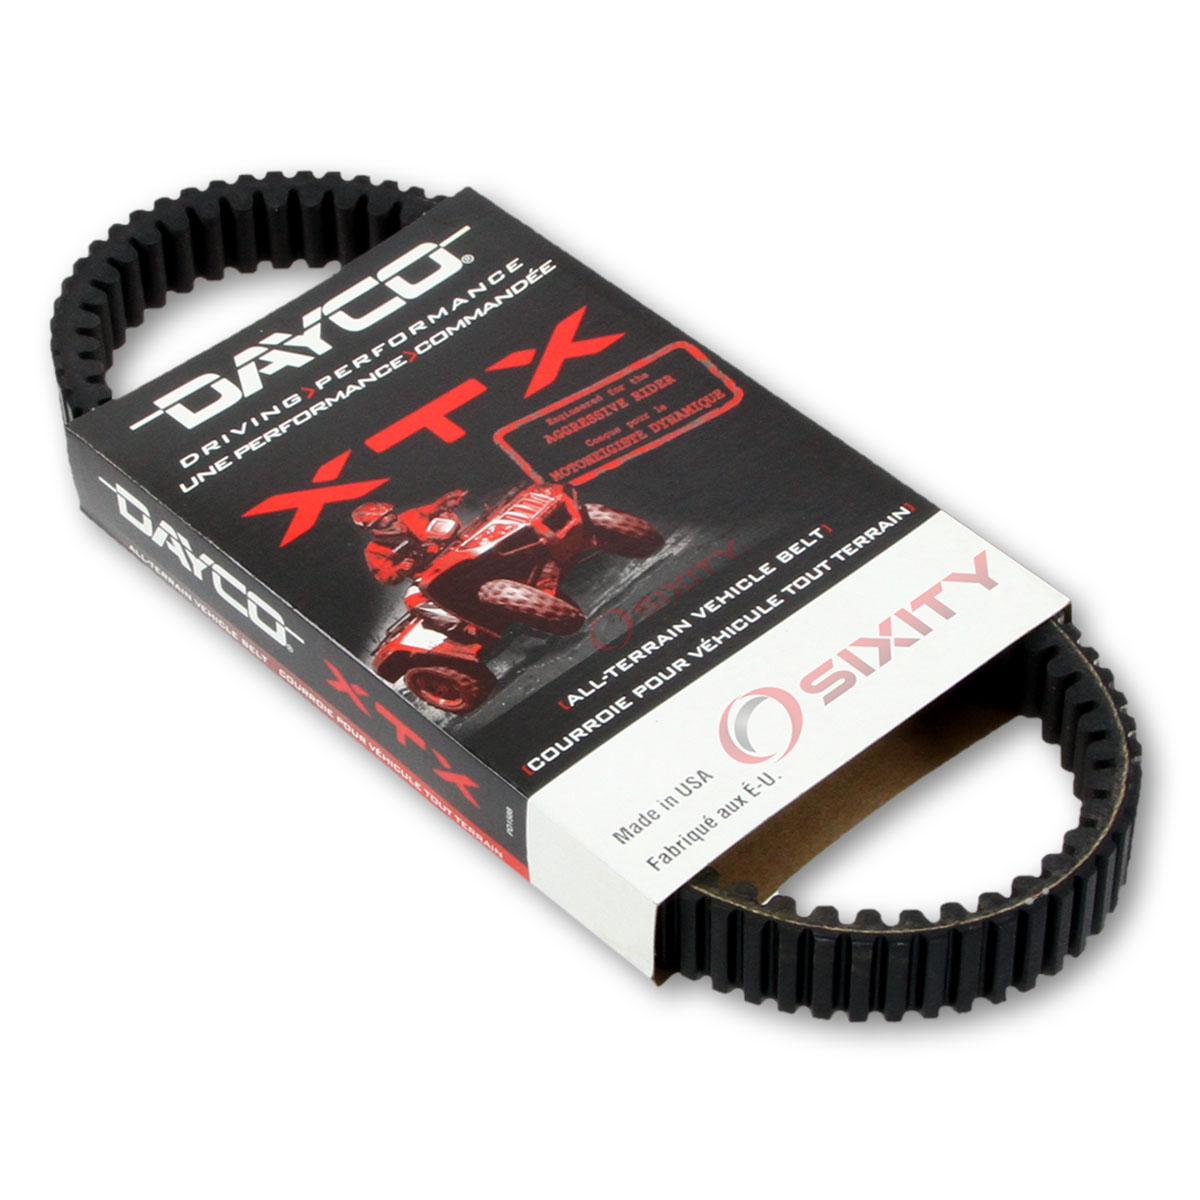 Dayco XTX Drive Belt for 2003-2004 Arctic Cat 400 4x4 ACT - Extreme Torque